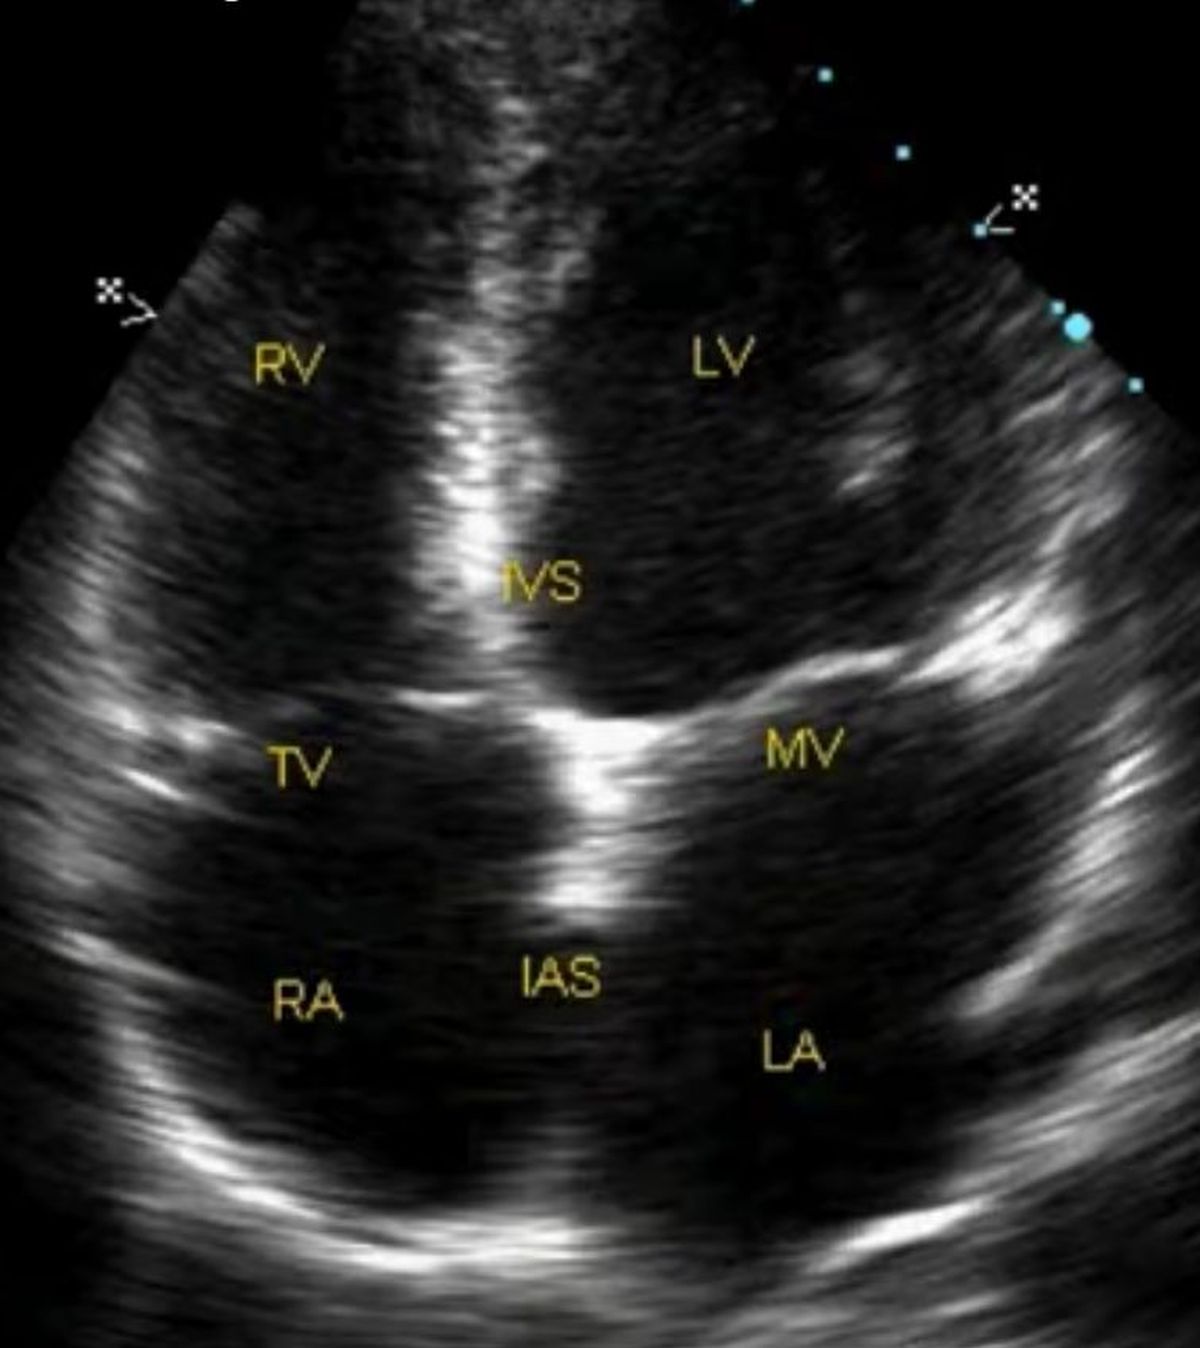 Echocardiogram (ultrasound image of the heart) showing four chambers and two valves